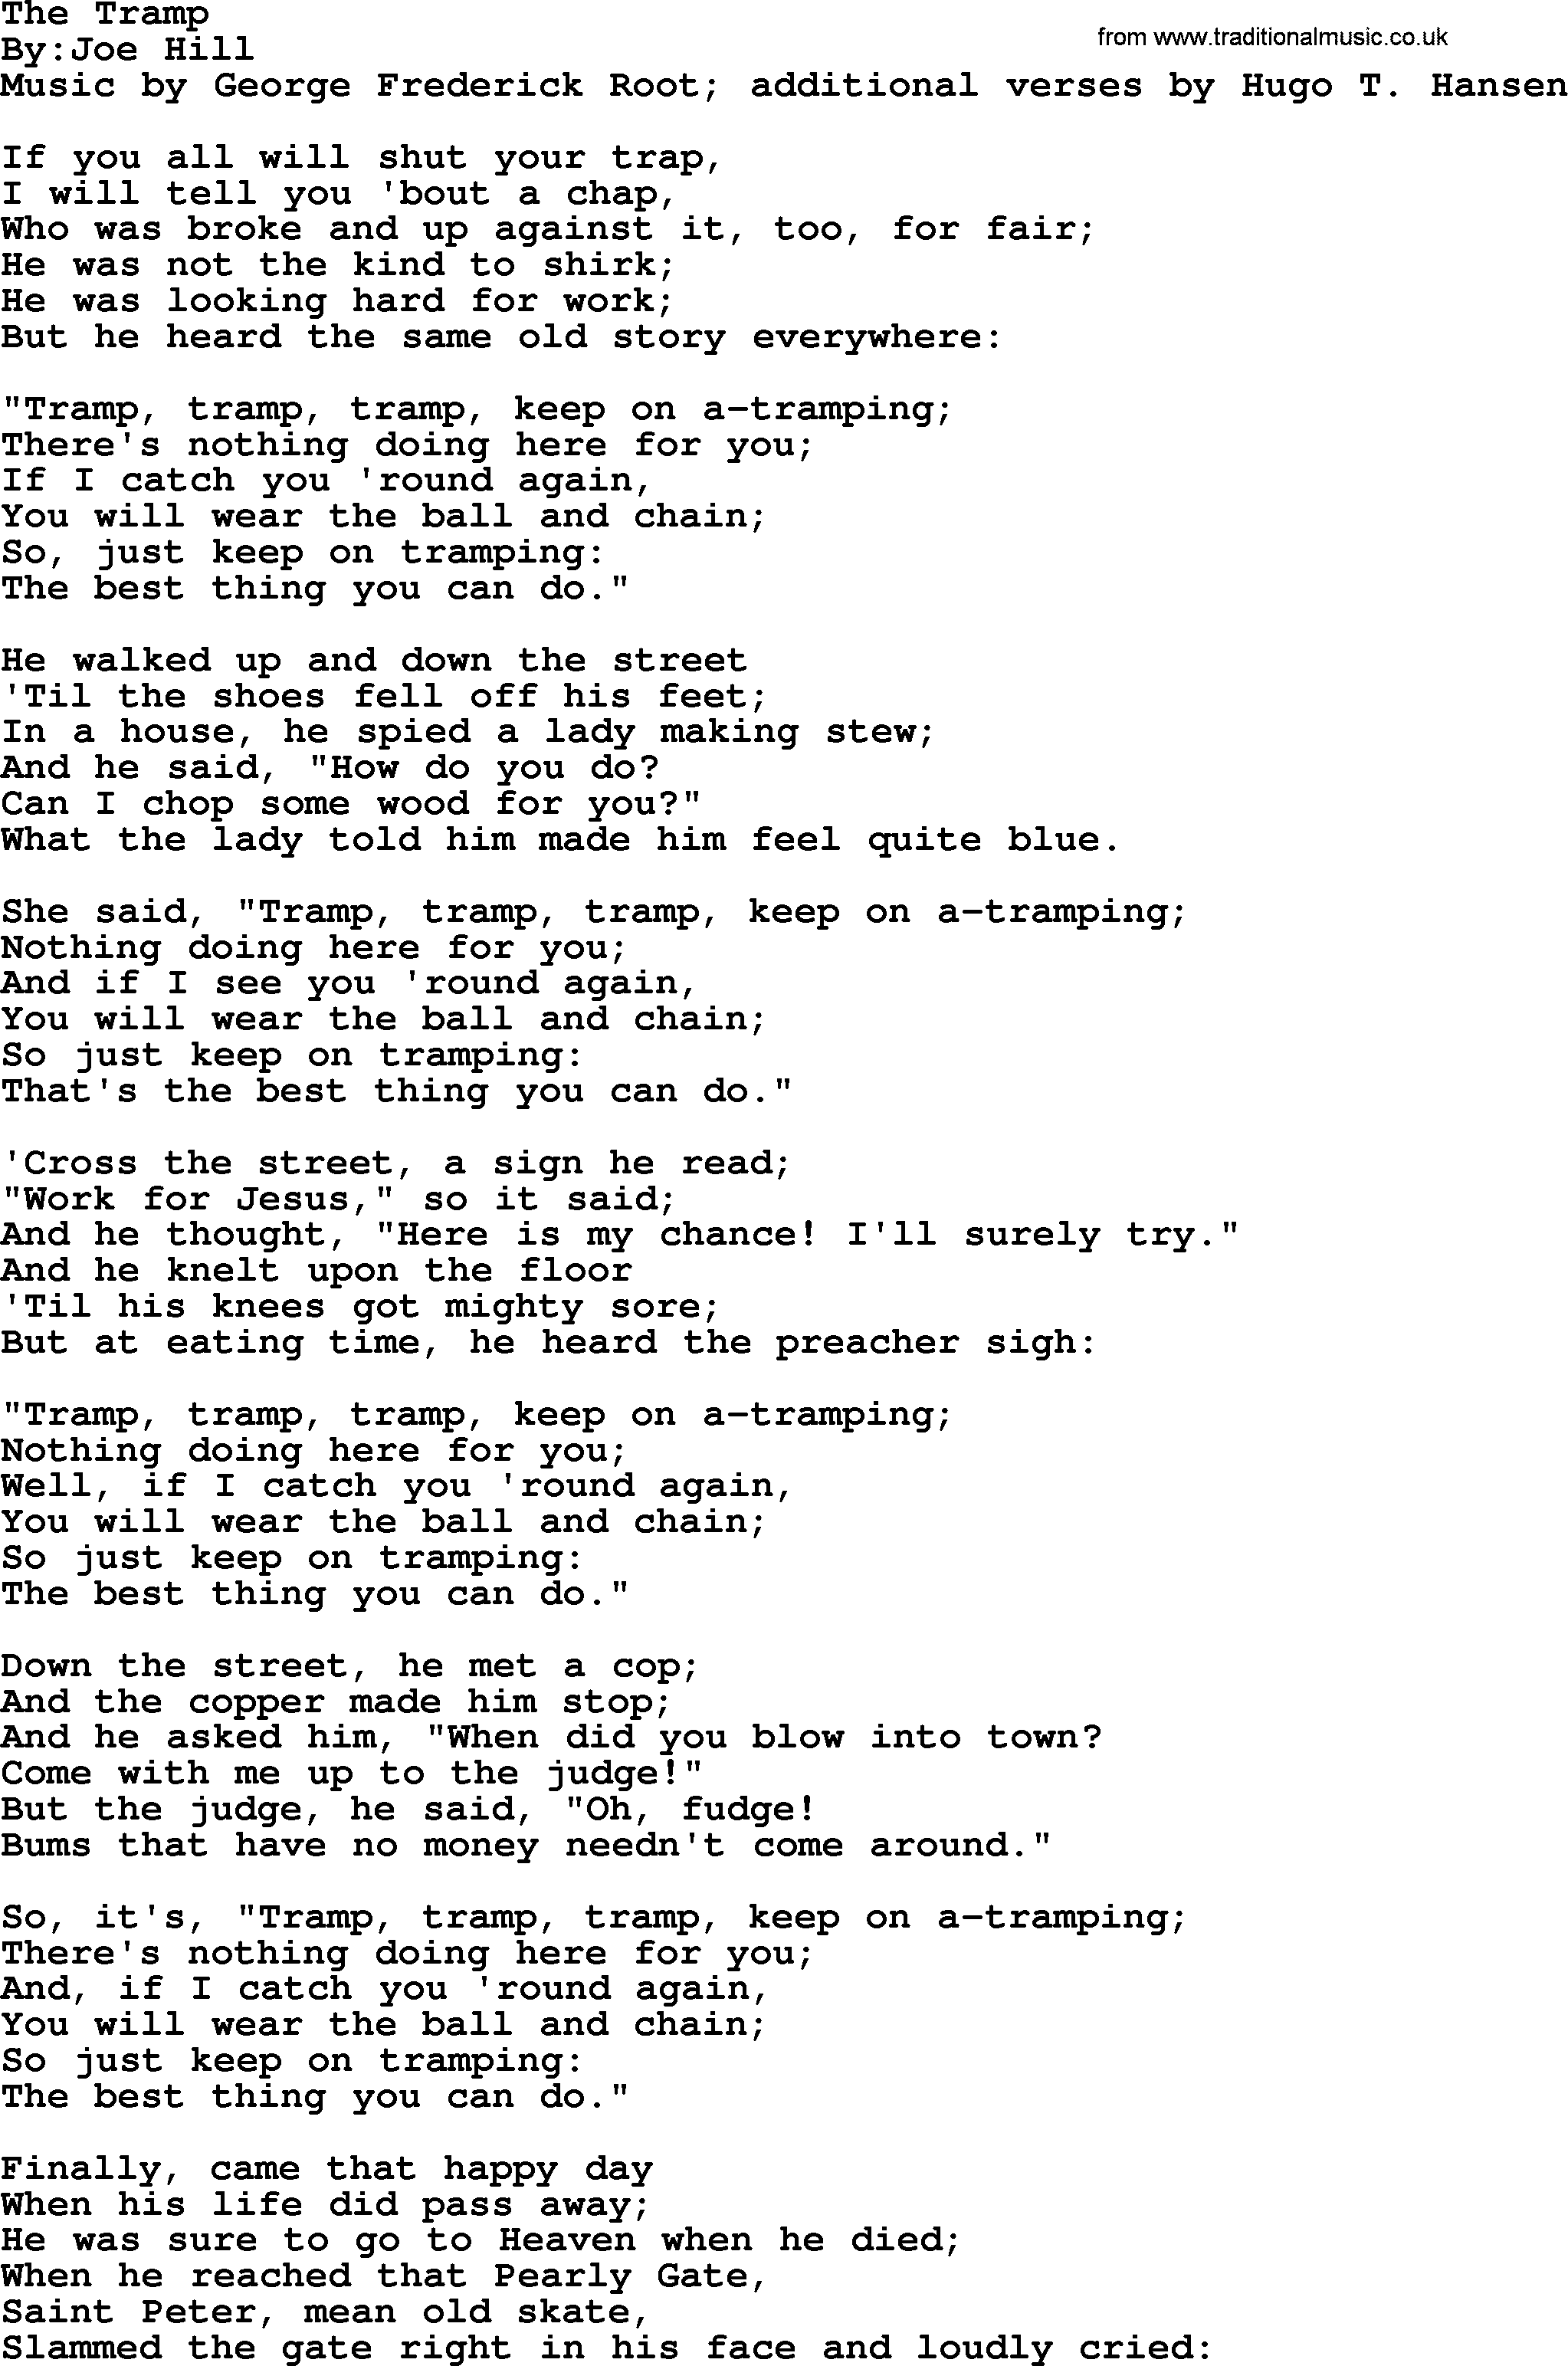 Political, Solidarity, Workers or Union song: The Tramp, lyrics